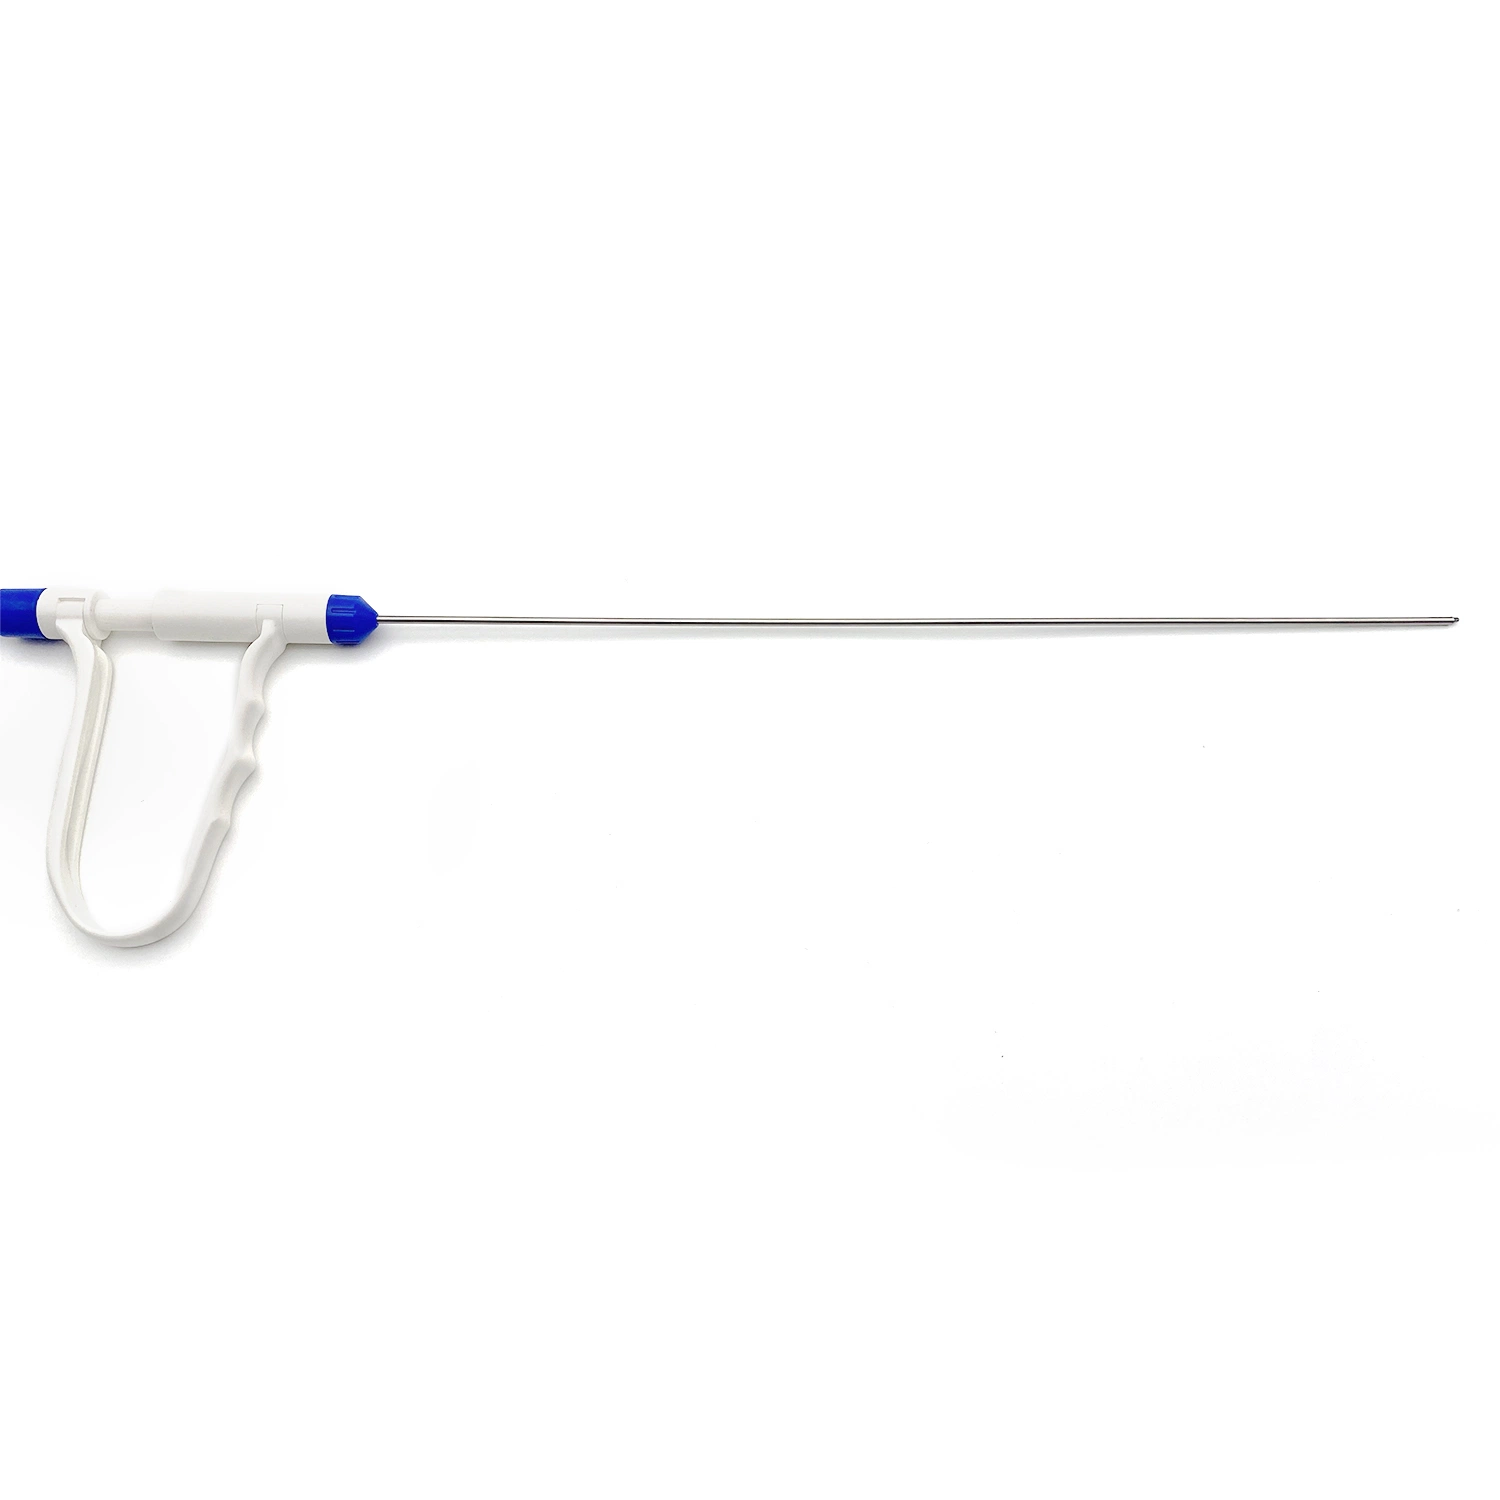 Radio Frequency Bipolar Electrodes for Endoscope Spine Surgery (Coagulation & Ablation)